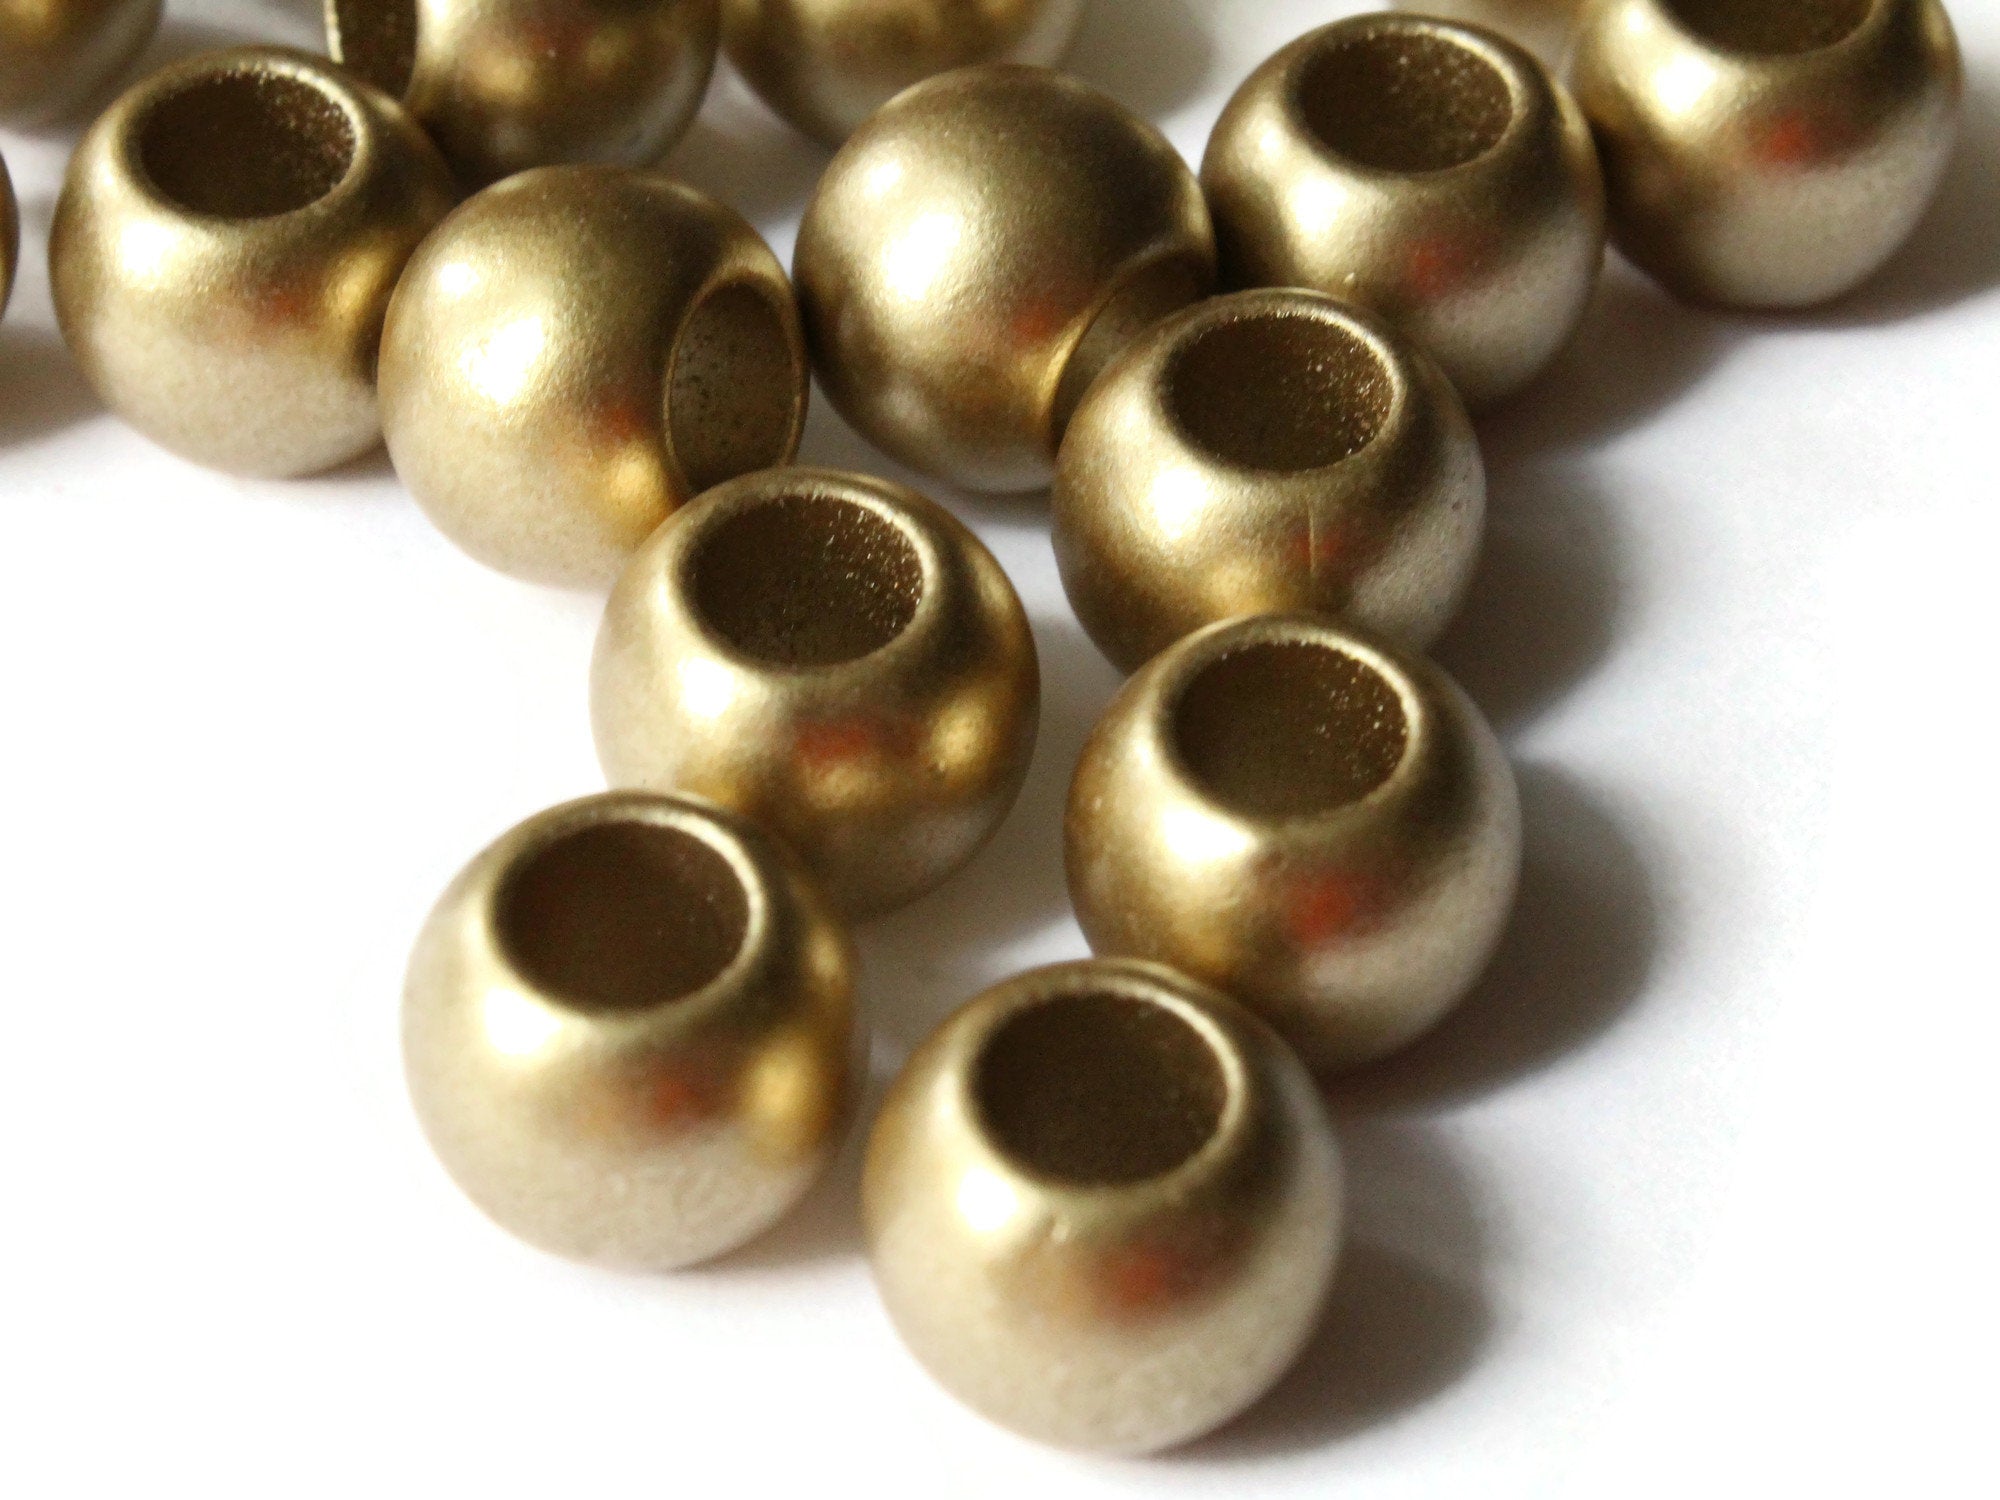 30 12mm Gold Acrylic Tube Beads to String Large Hole Beads by Smileyboy | Michaels